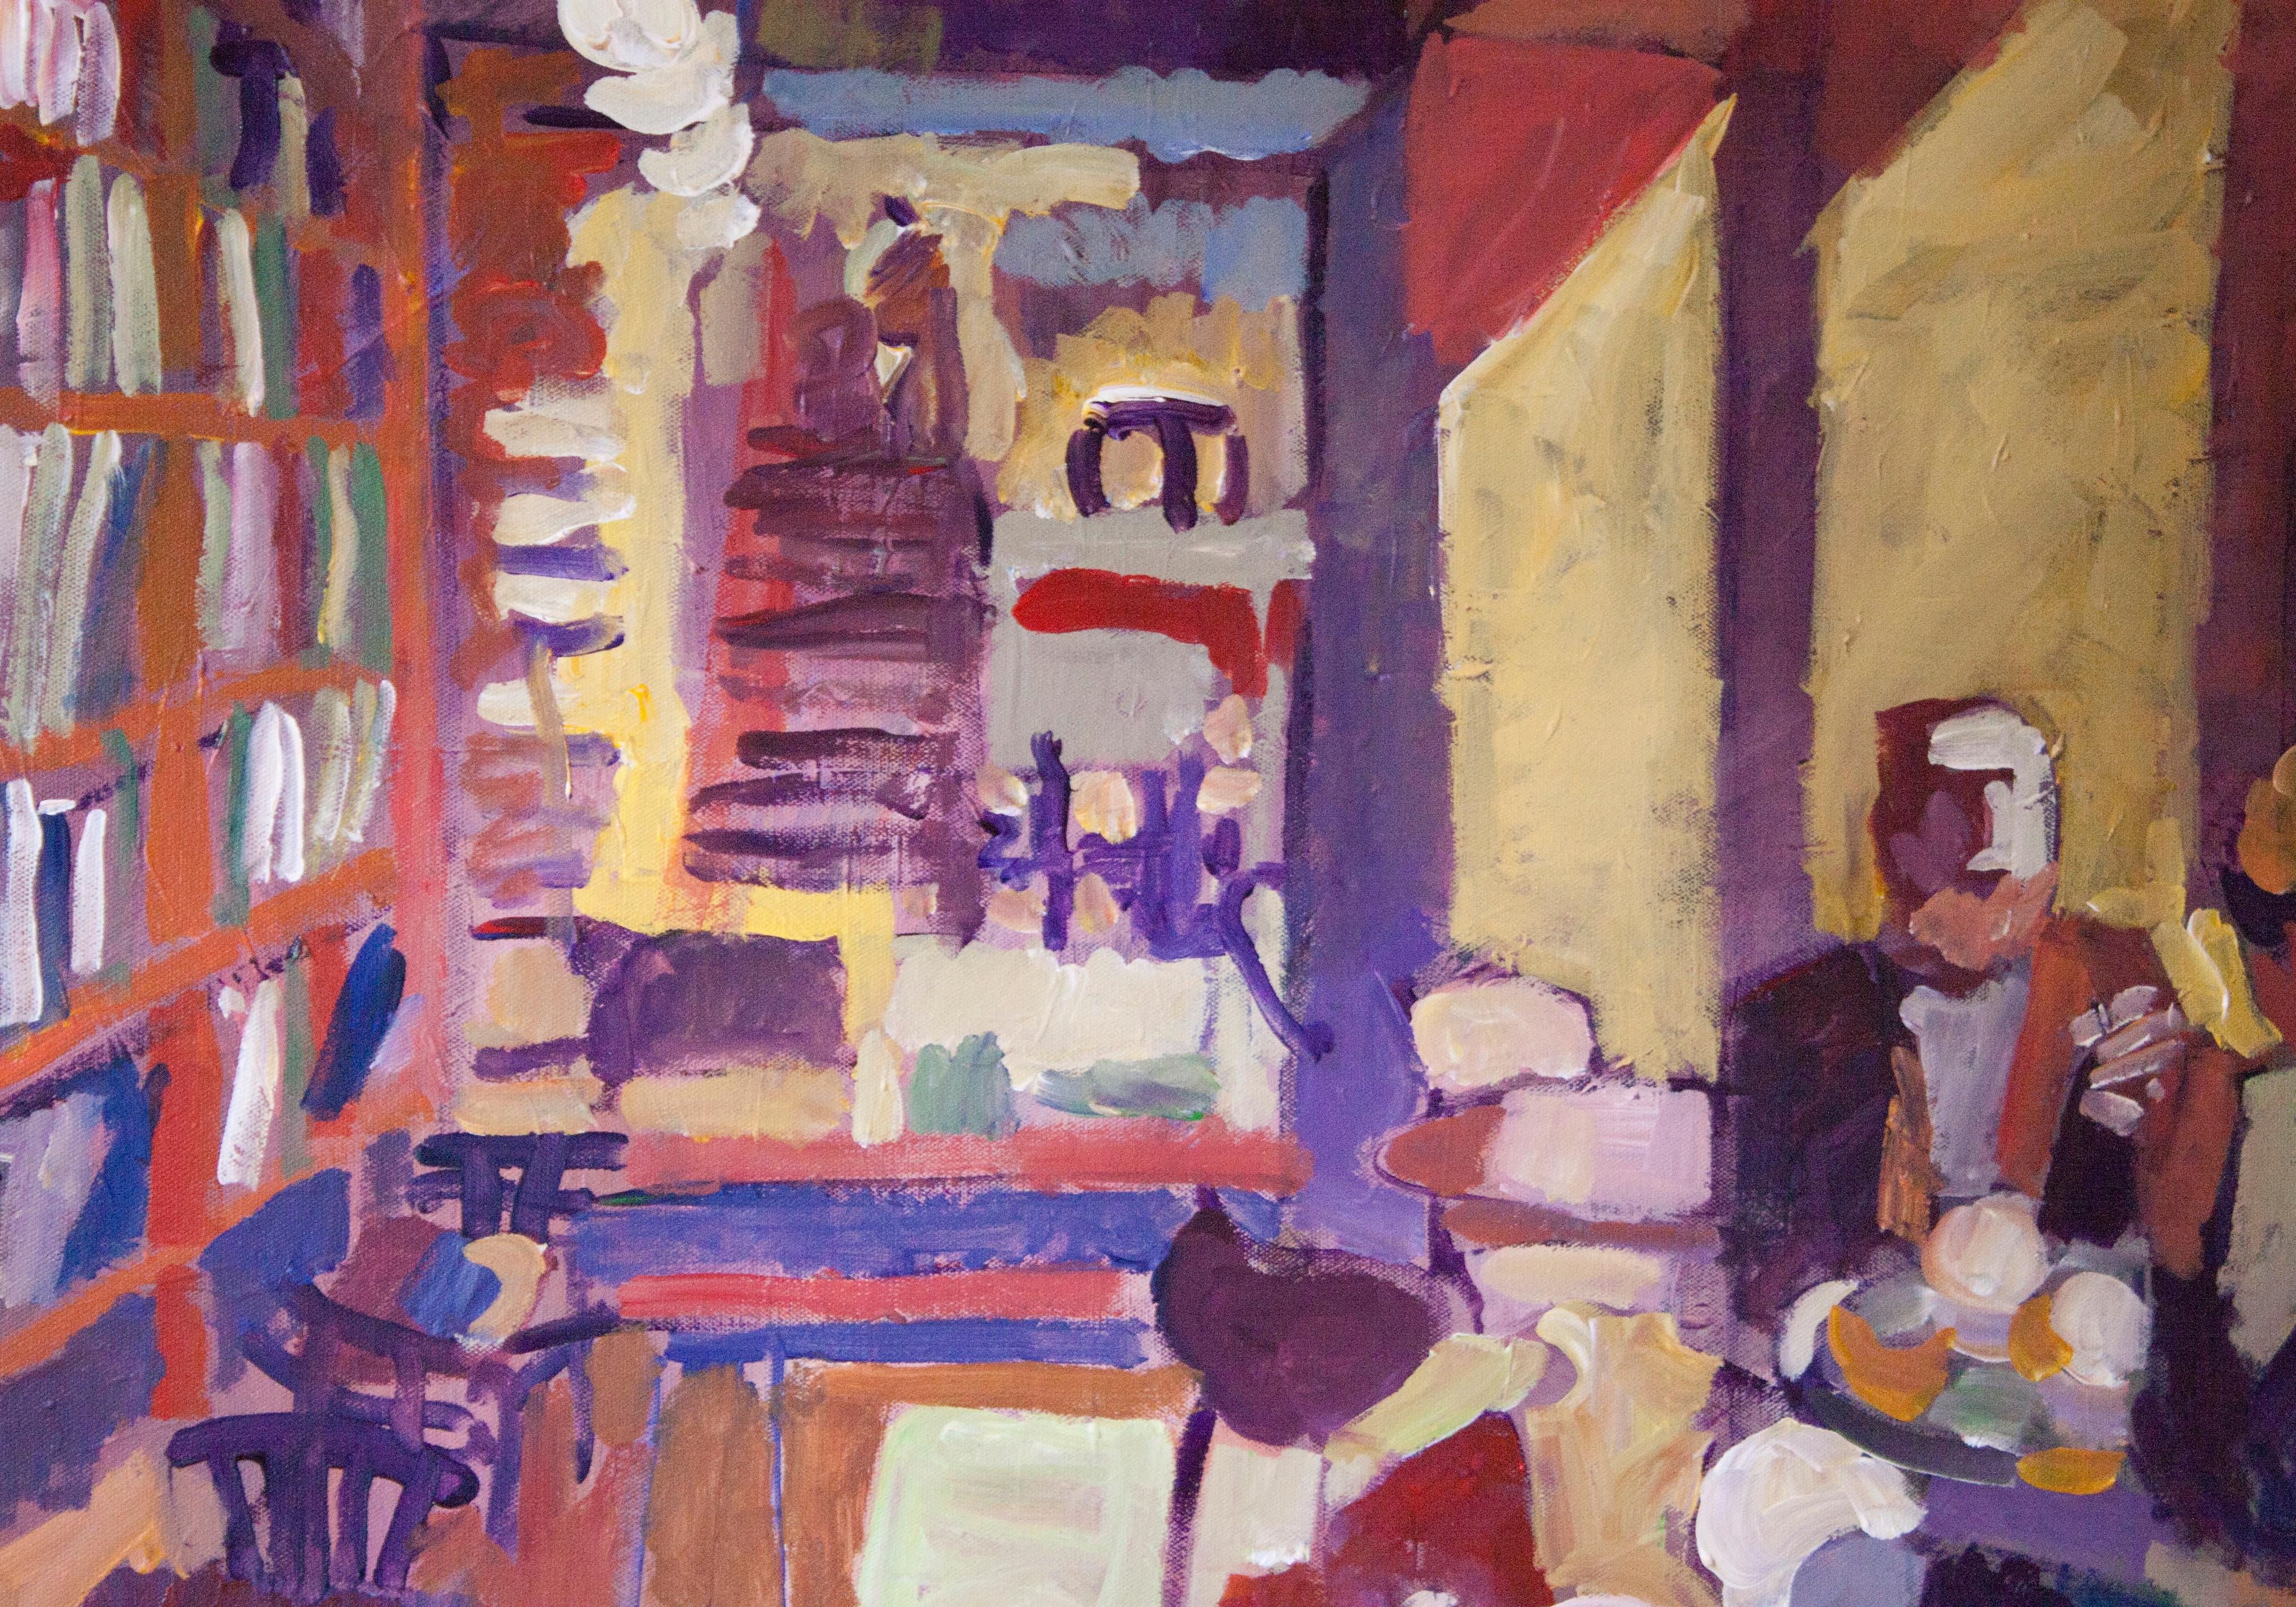 Interior Study - Abstract Expressionist Painting by Robert Hofherr